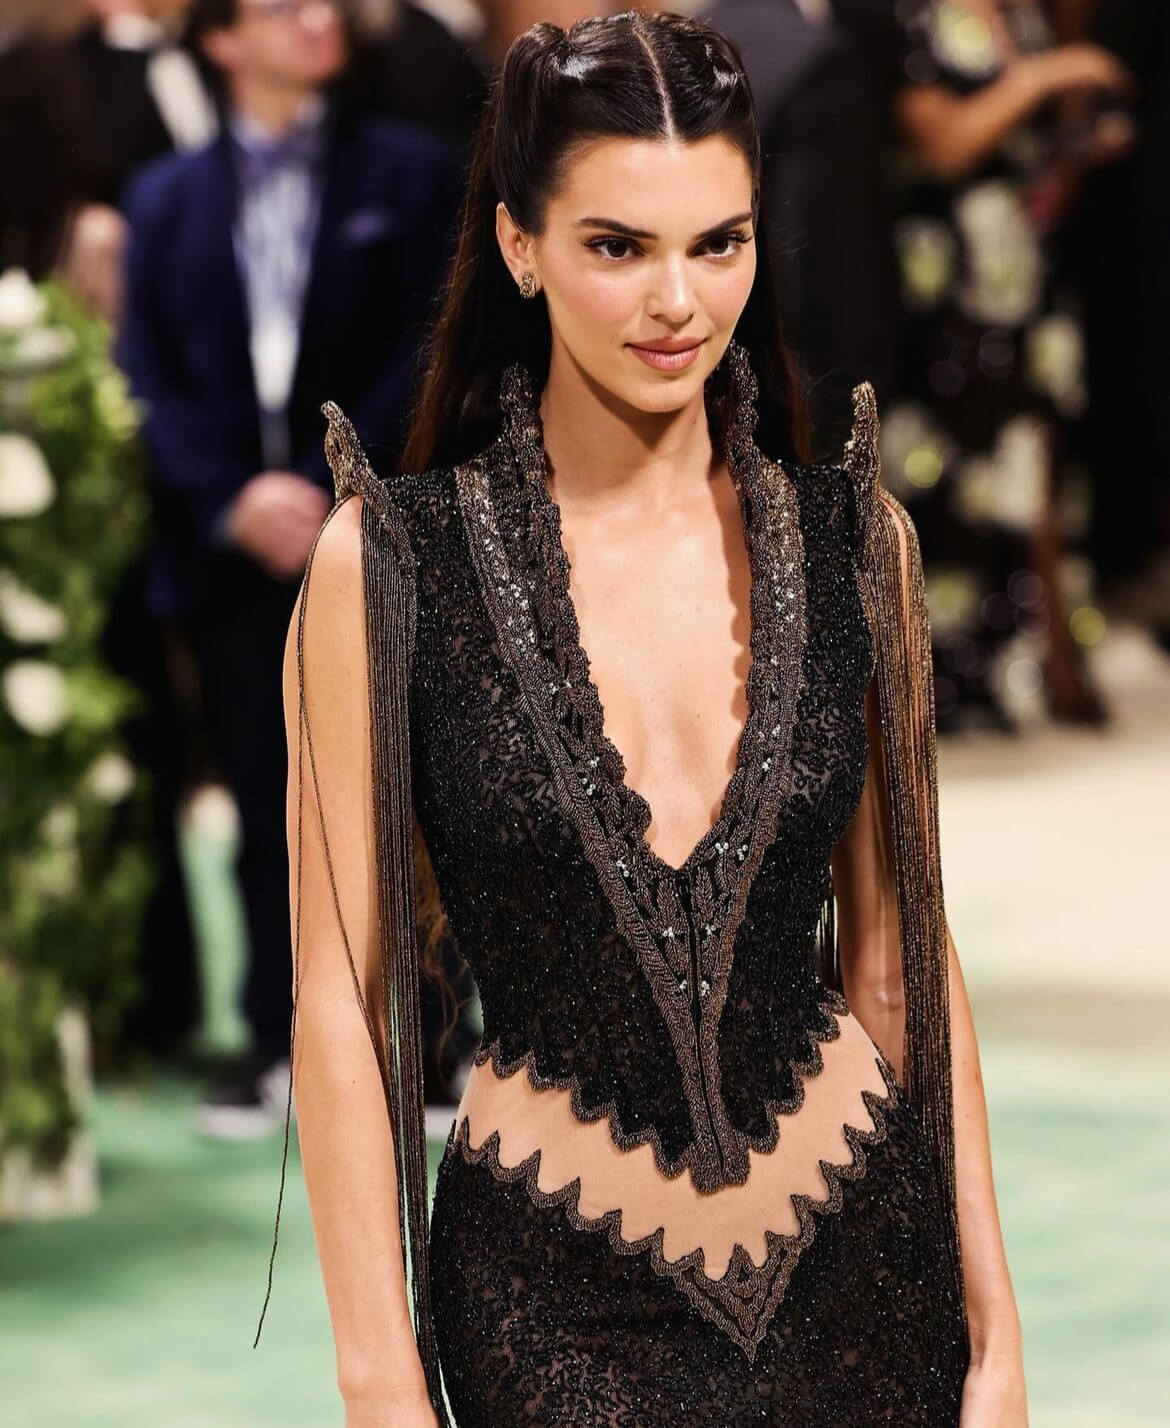 Jenner expressed her excitement about wearing McQueen's creation, telling Vogue about its unique features, including a scalloped butt cutout, a high-neckline, and intricate beaded details. 